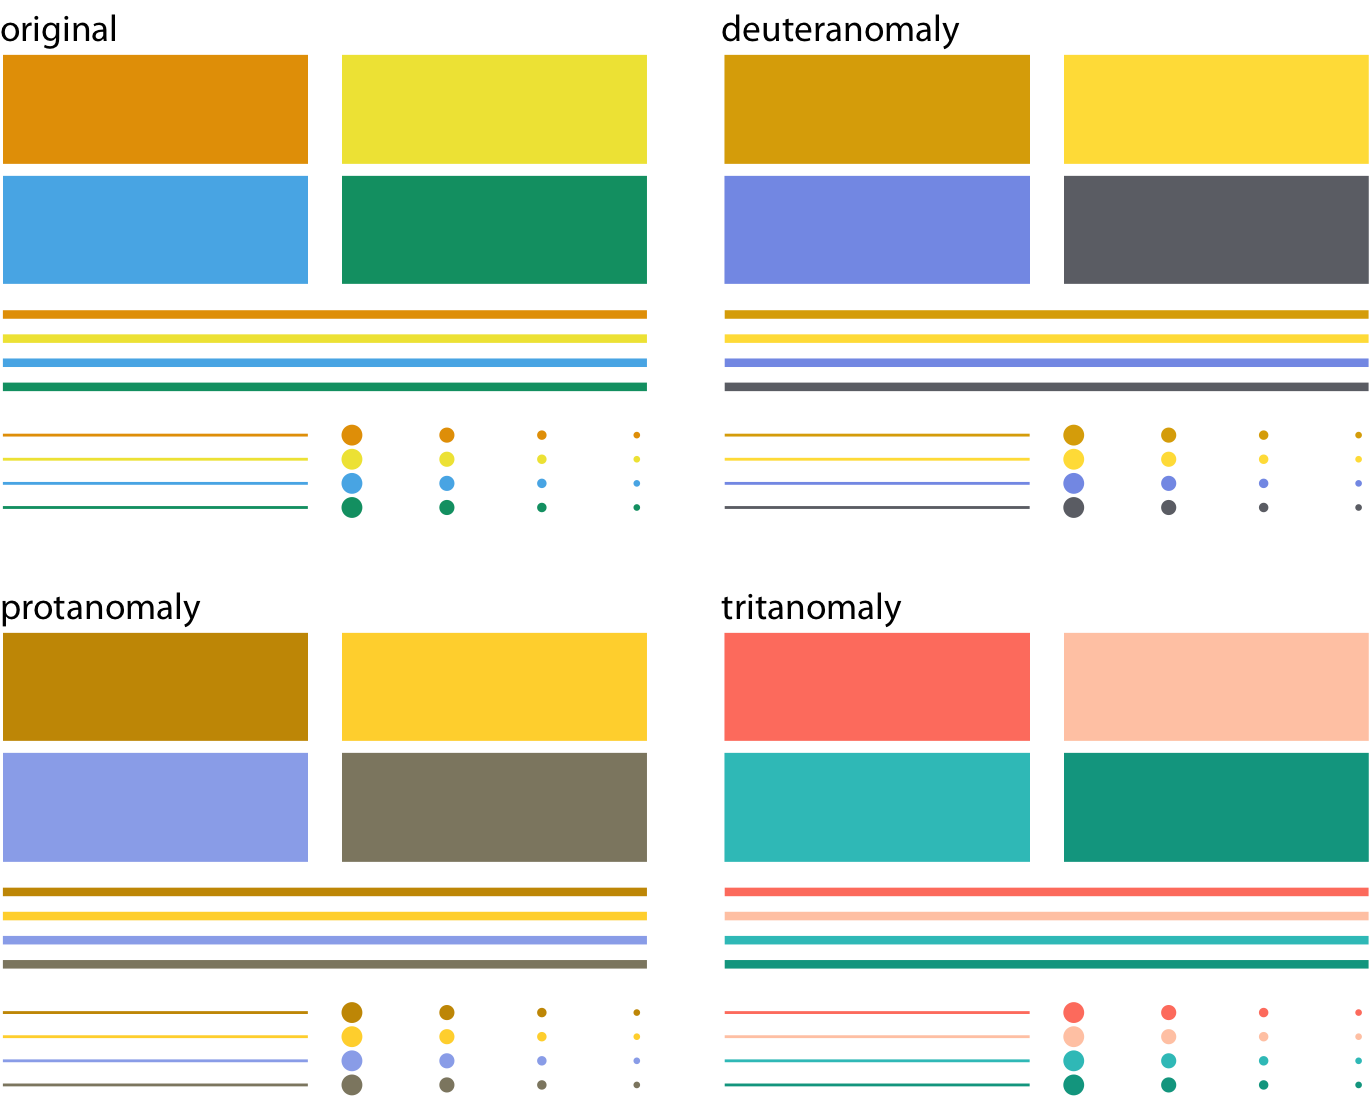 Colored elements become difficult to distinguish at small sizes. The top left panel (labeled “original”) shows four rectangles, four thick lines, four thin lines, and four groups of points, all colored in the same four colors. We can see that the colors become more difficult to distinguish the smaller or thinner the visual elements are. This problem becomes exacerbated in the cvd simulations, where the colors are already more difficult to distinguish even for the large graphical elements.